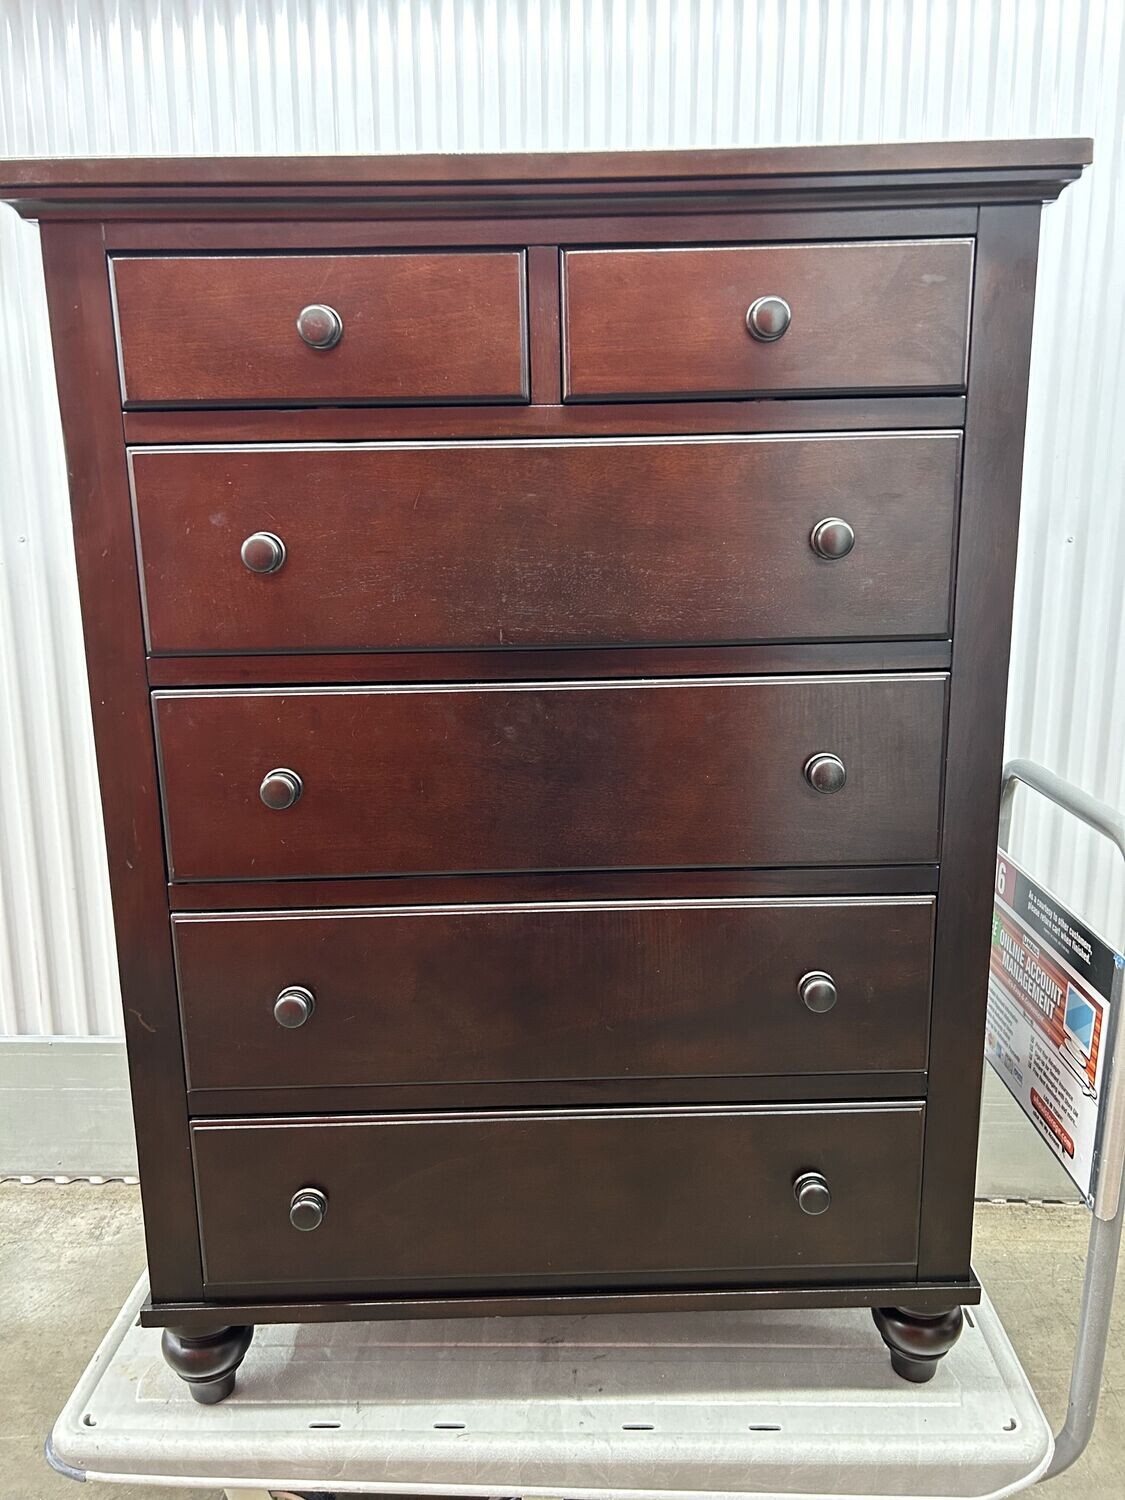 6-drawer Tall Dresser dark brown , matching pieces #2126 ** 5 days to sell, full price